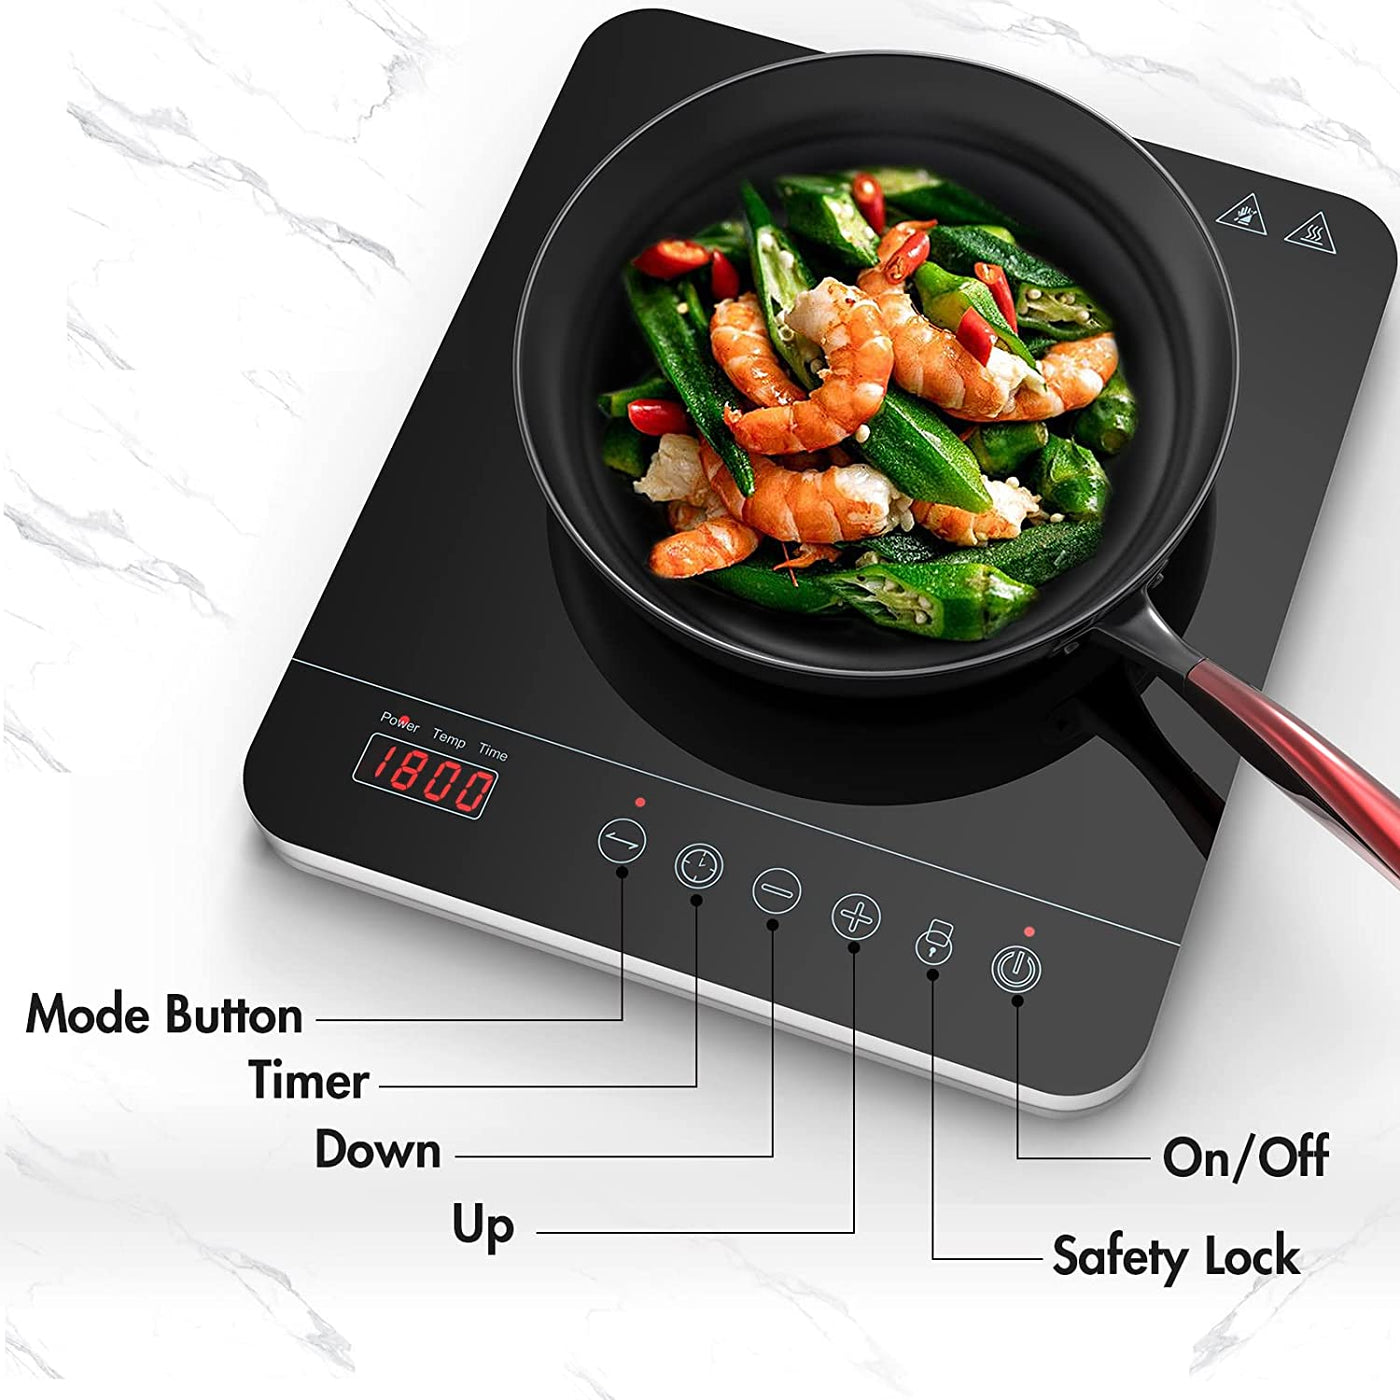 Aaobosi 1800W Portable Induction cooktop with 6 buttons